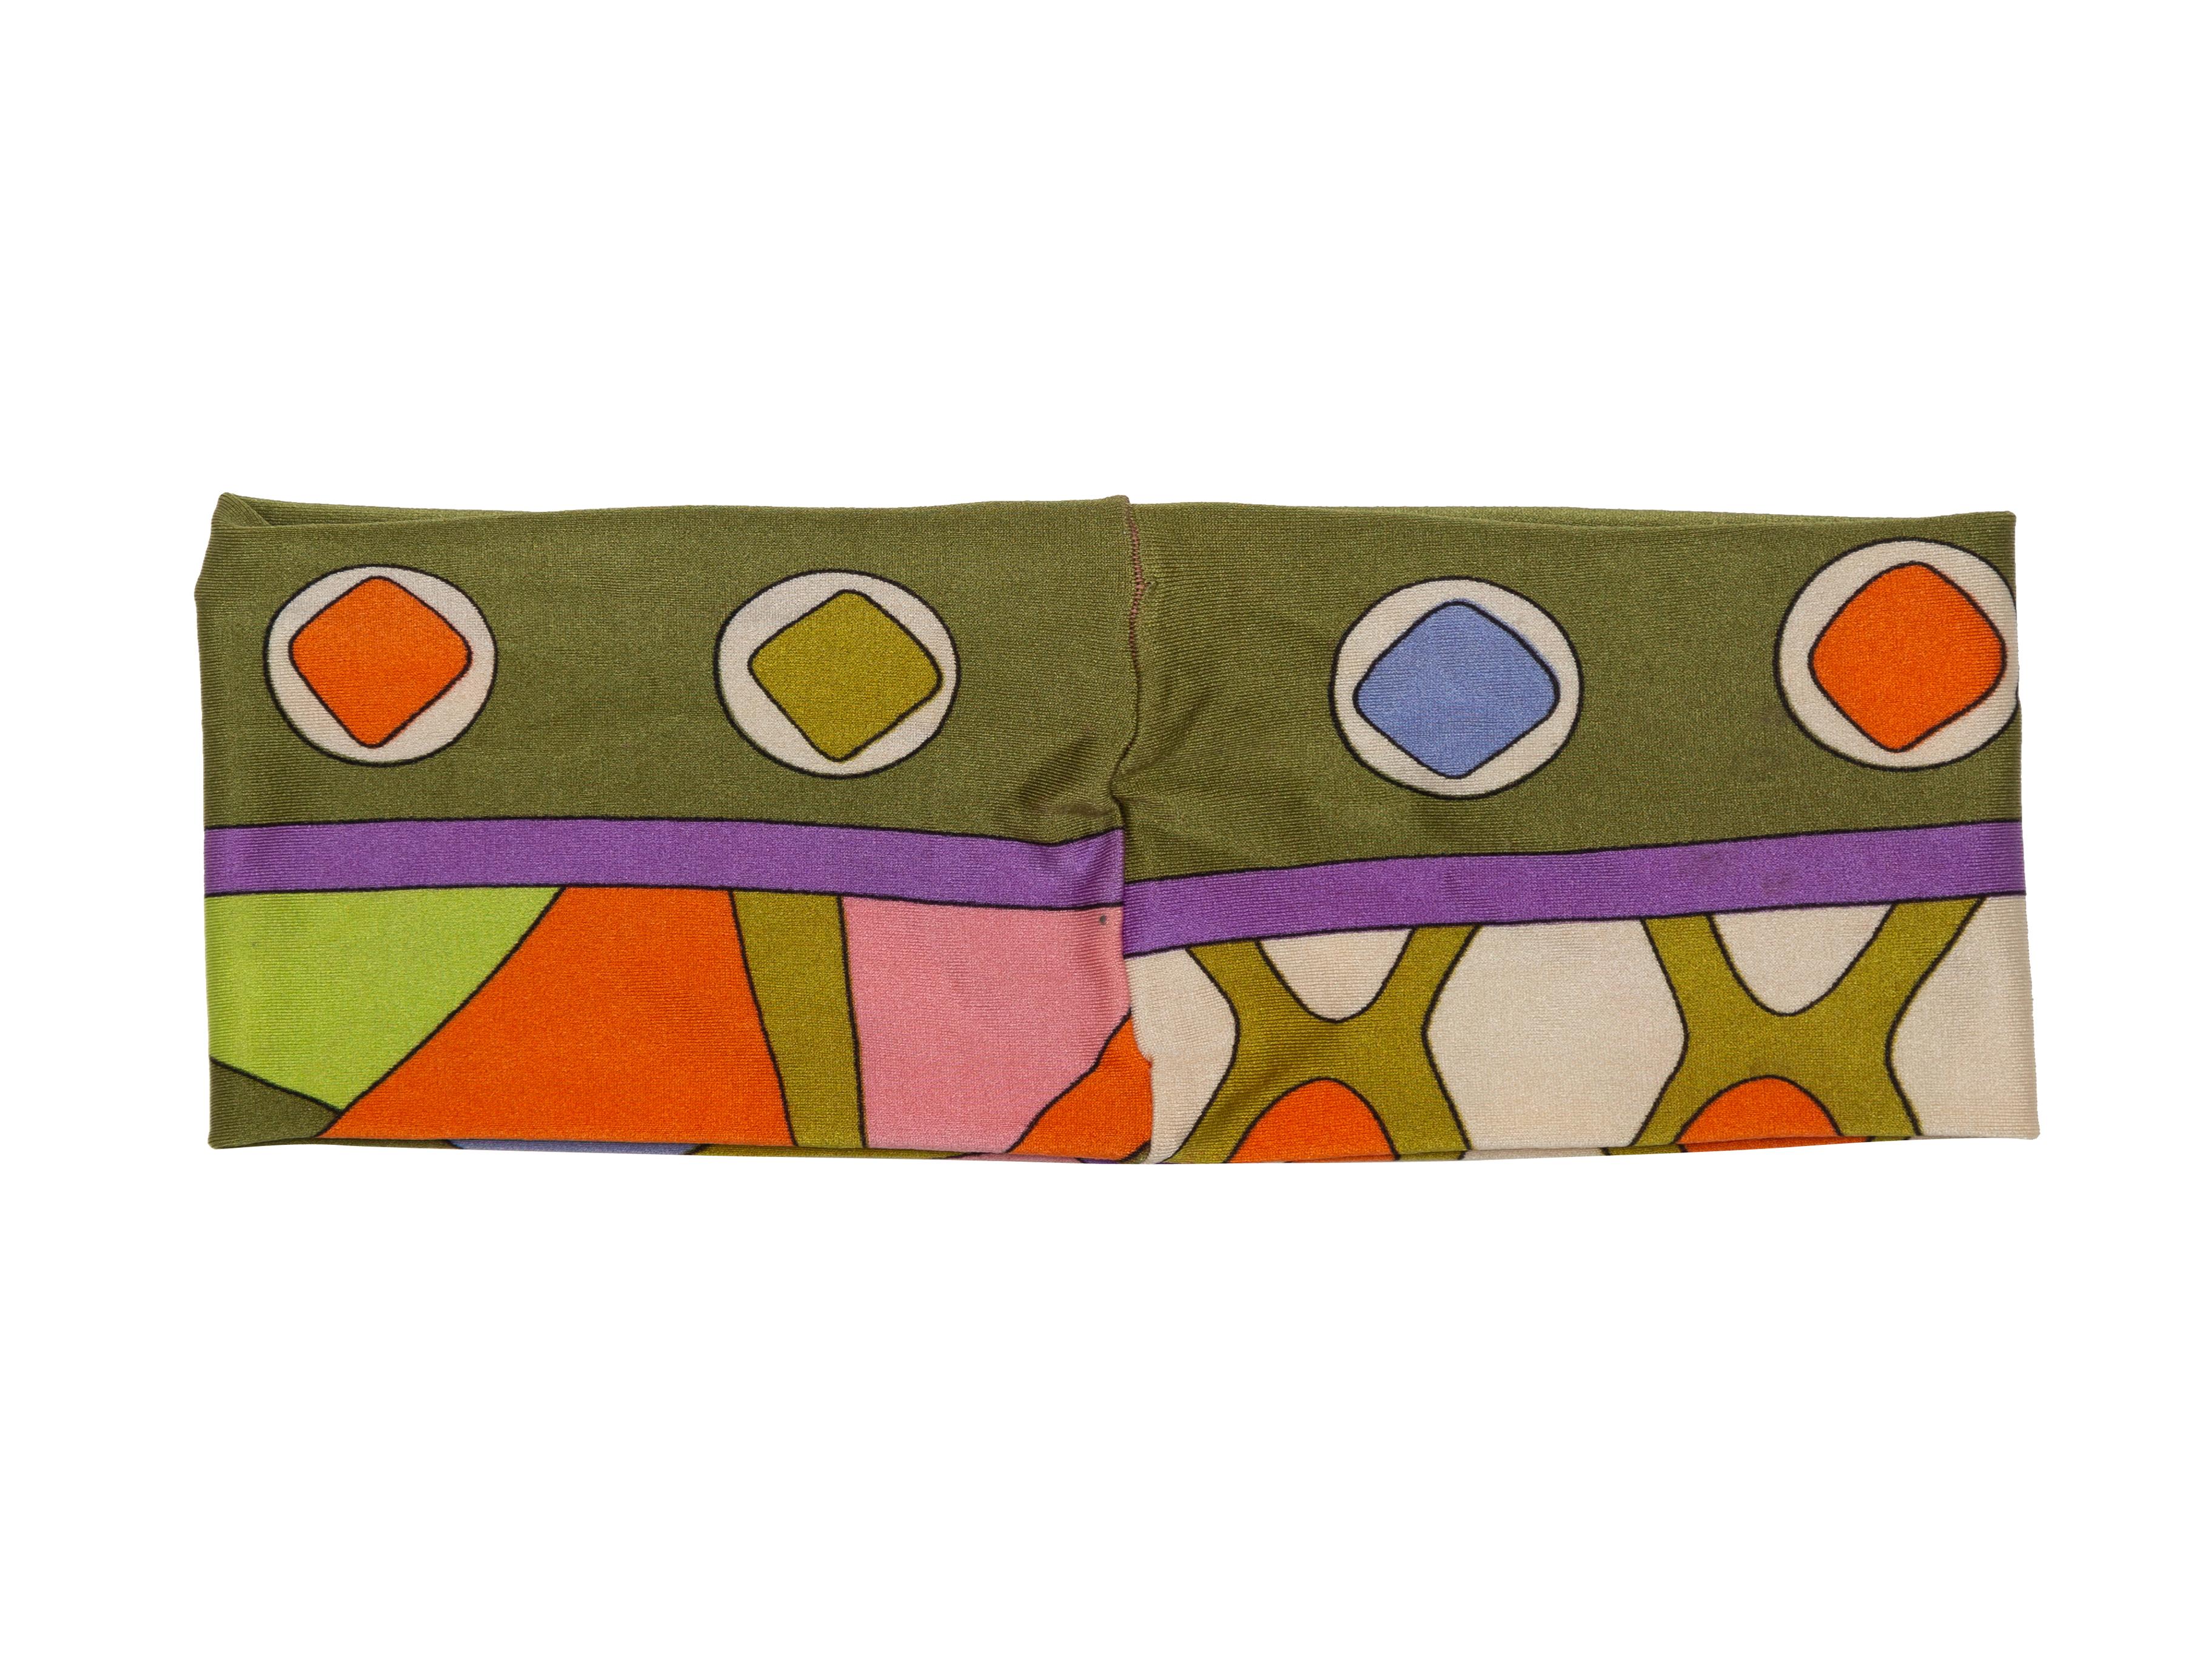 Product Details: Vintage olive green and multicolor abstract print stretchy headband by Emilio Pucci. 10